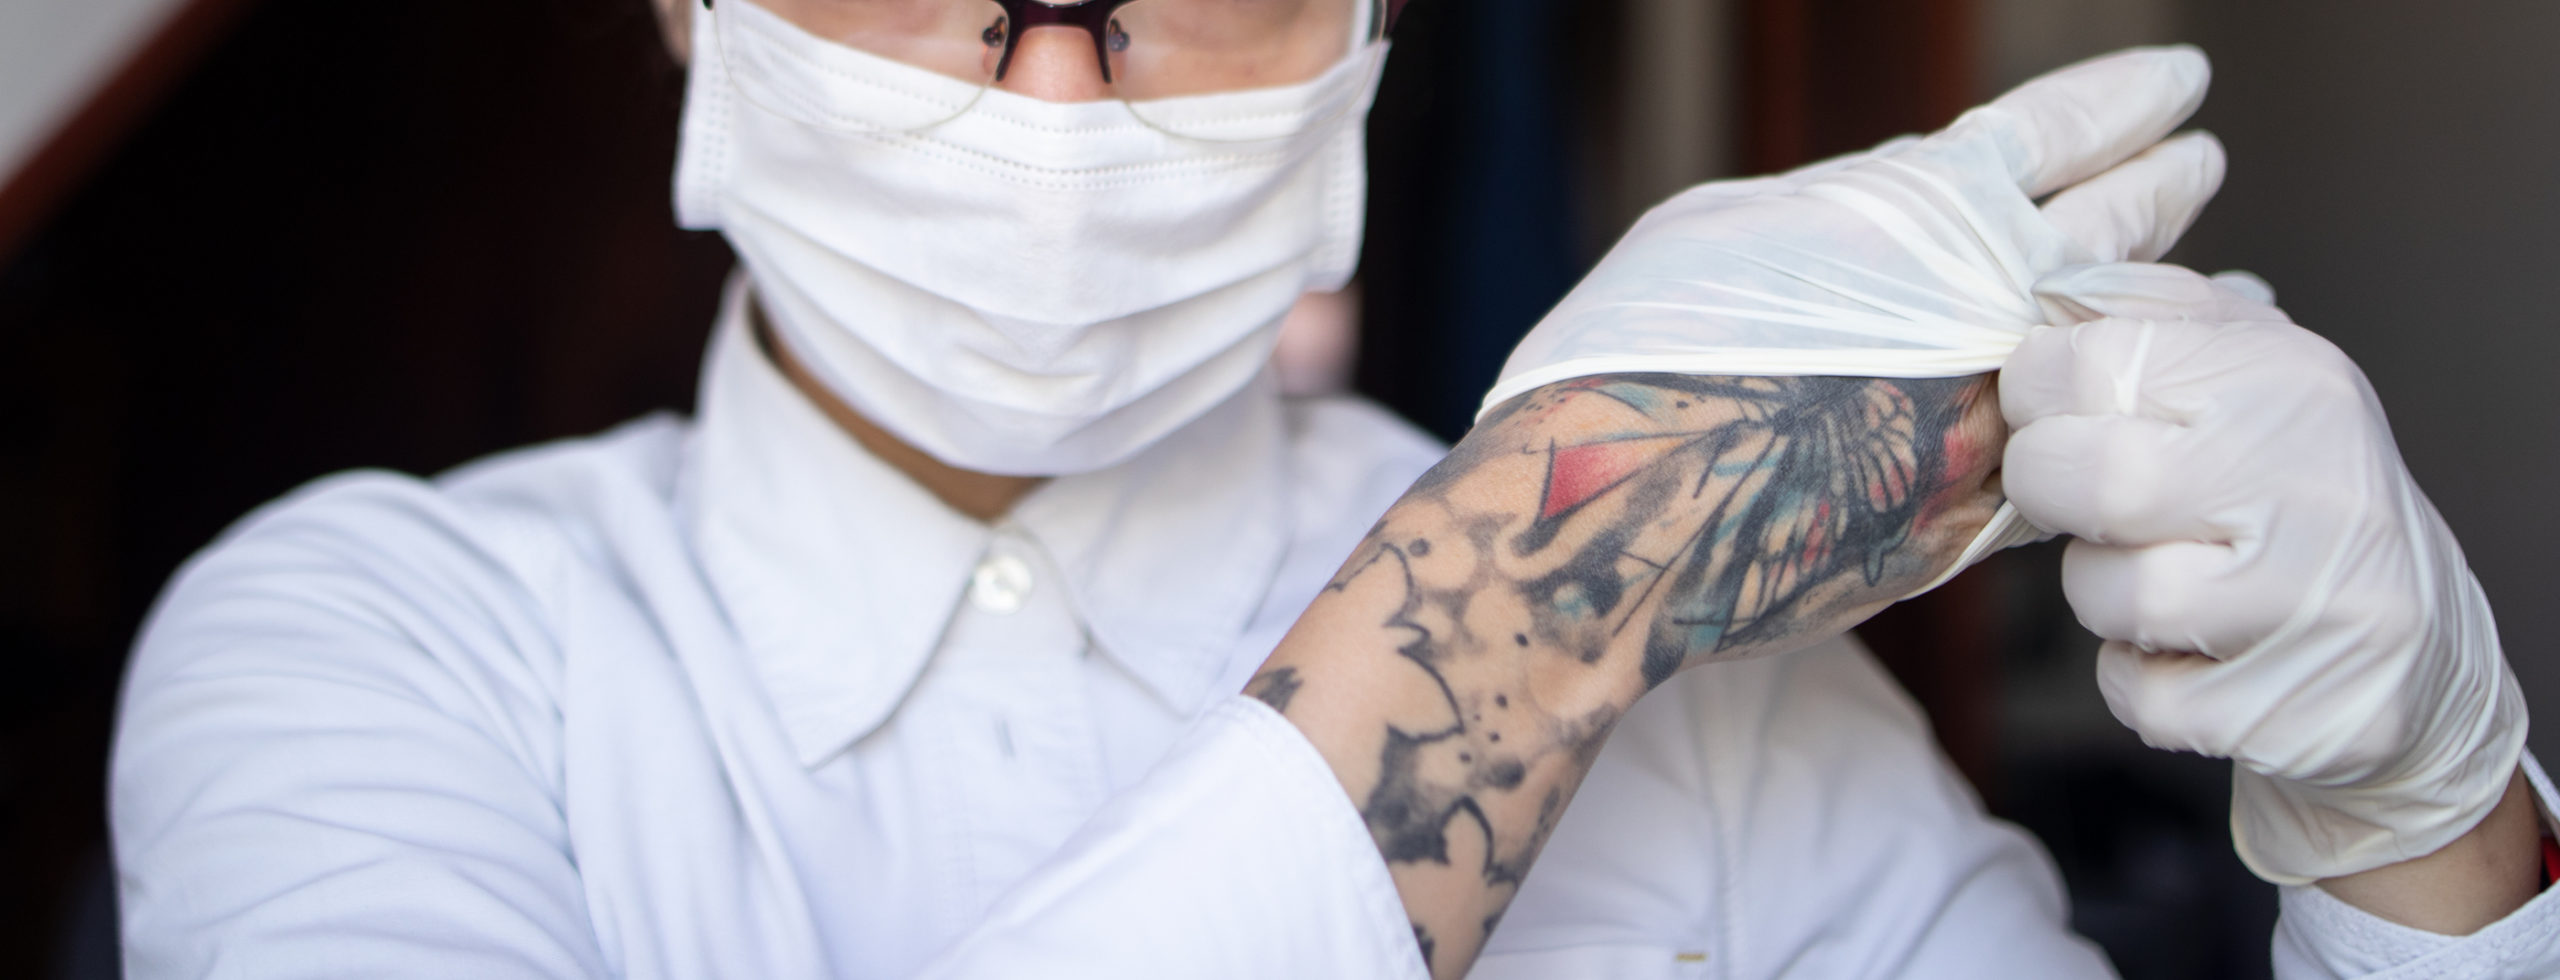 Hospital Ditches Outdated Dress Code Tattoos And Neon Hair Allowed  Nurse org